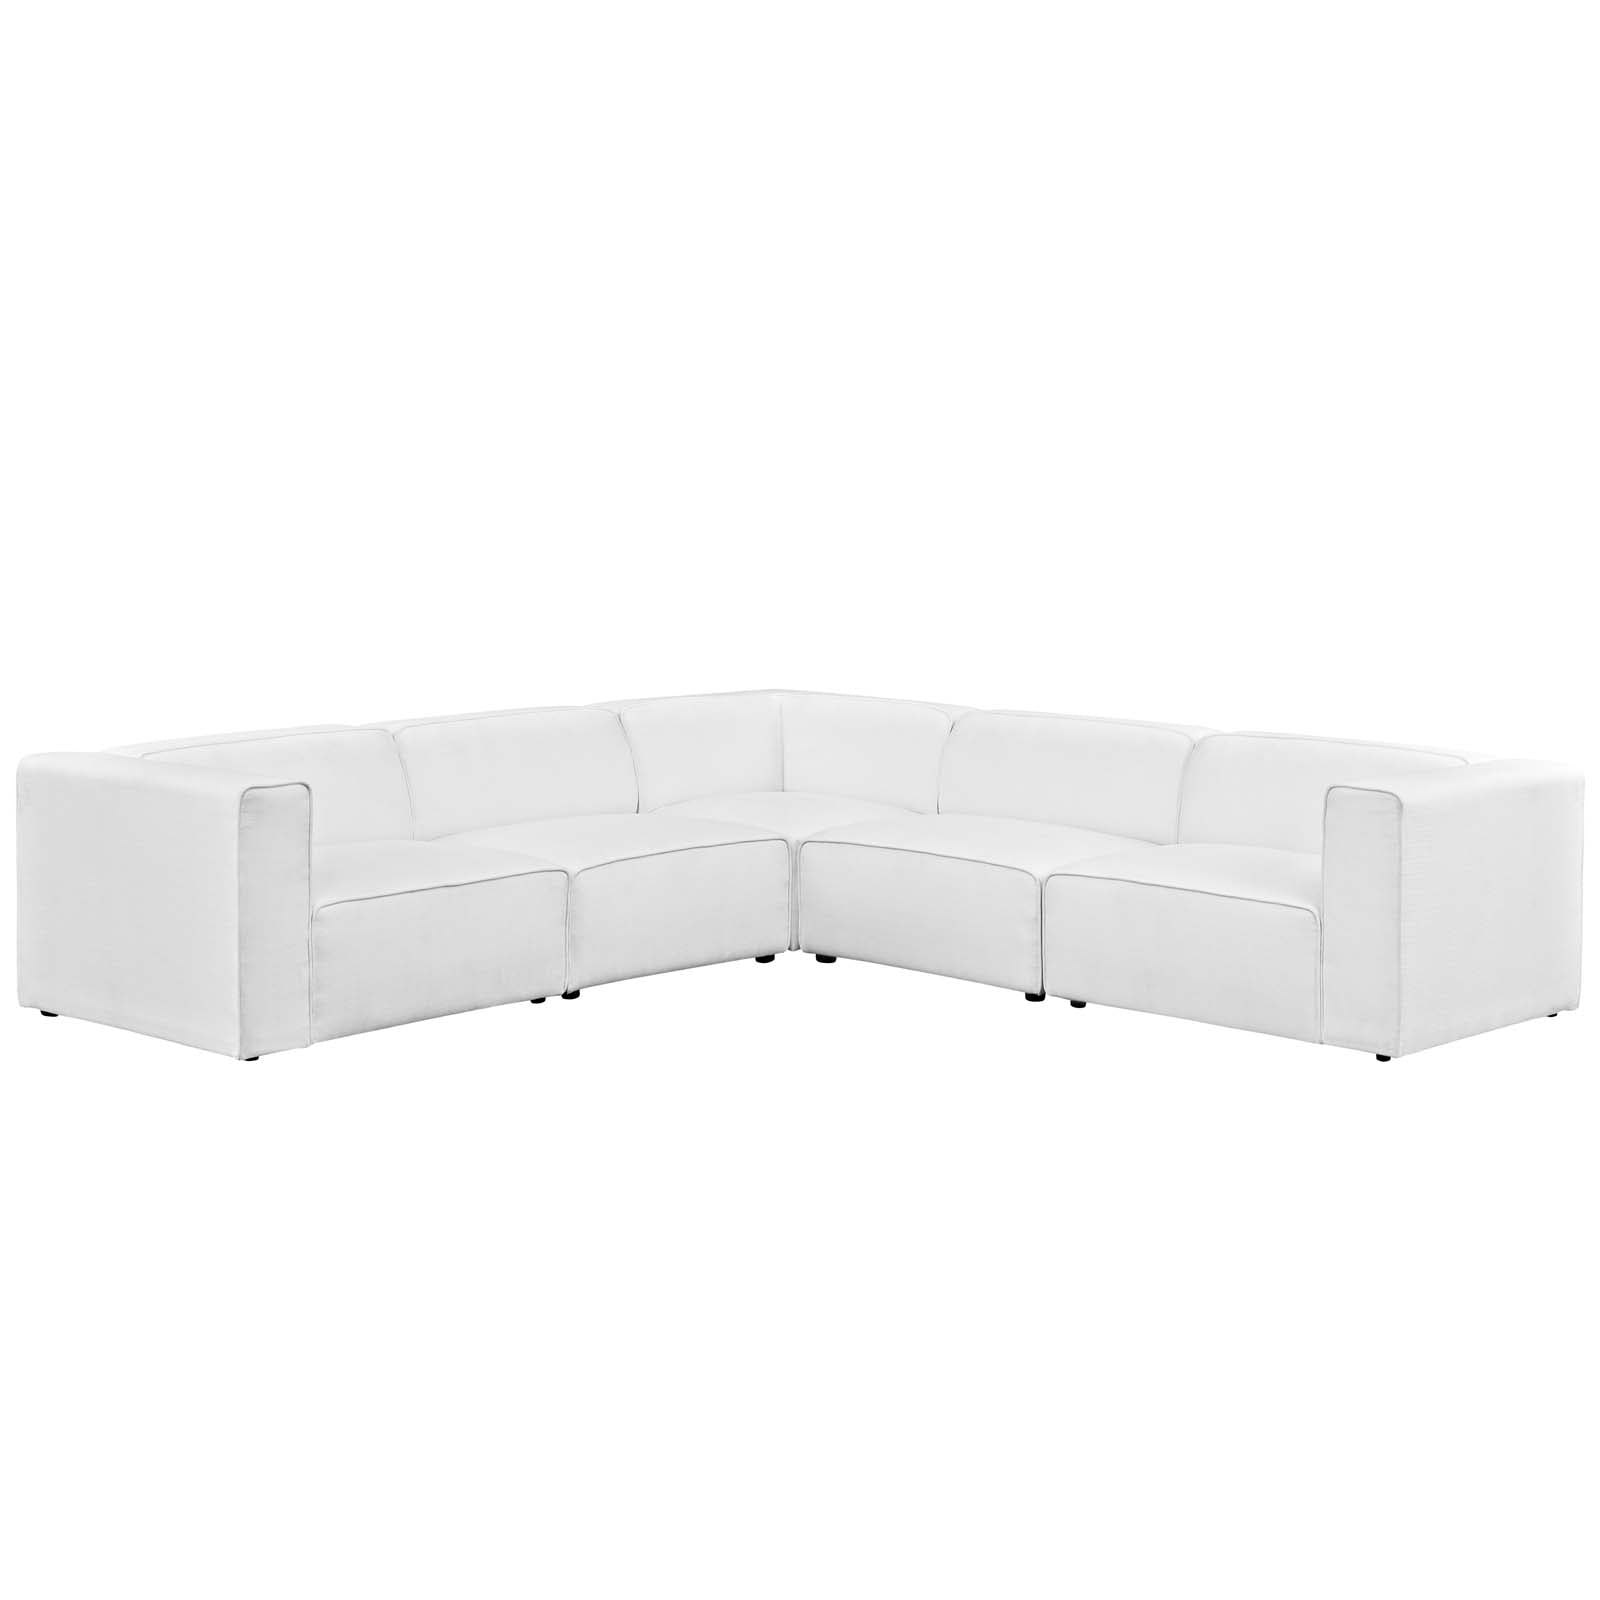 Modway Sectional Sofas - Mingle 5 Piece Upholstered Fabric Sectional Sofa Set White 115"